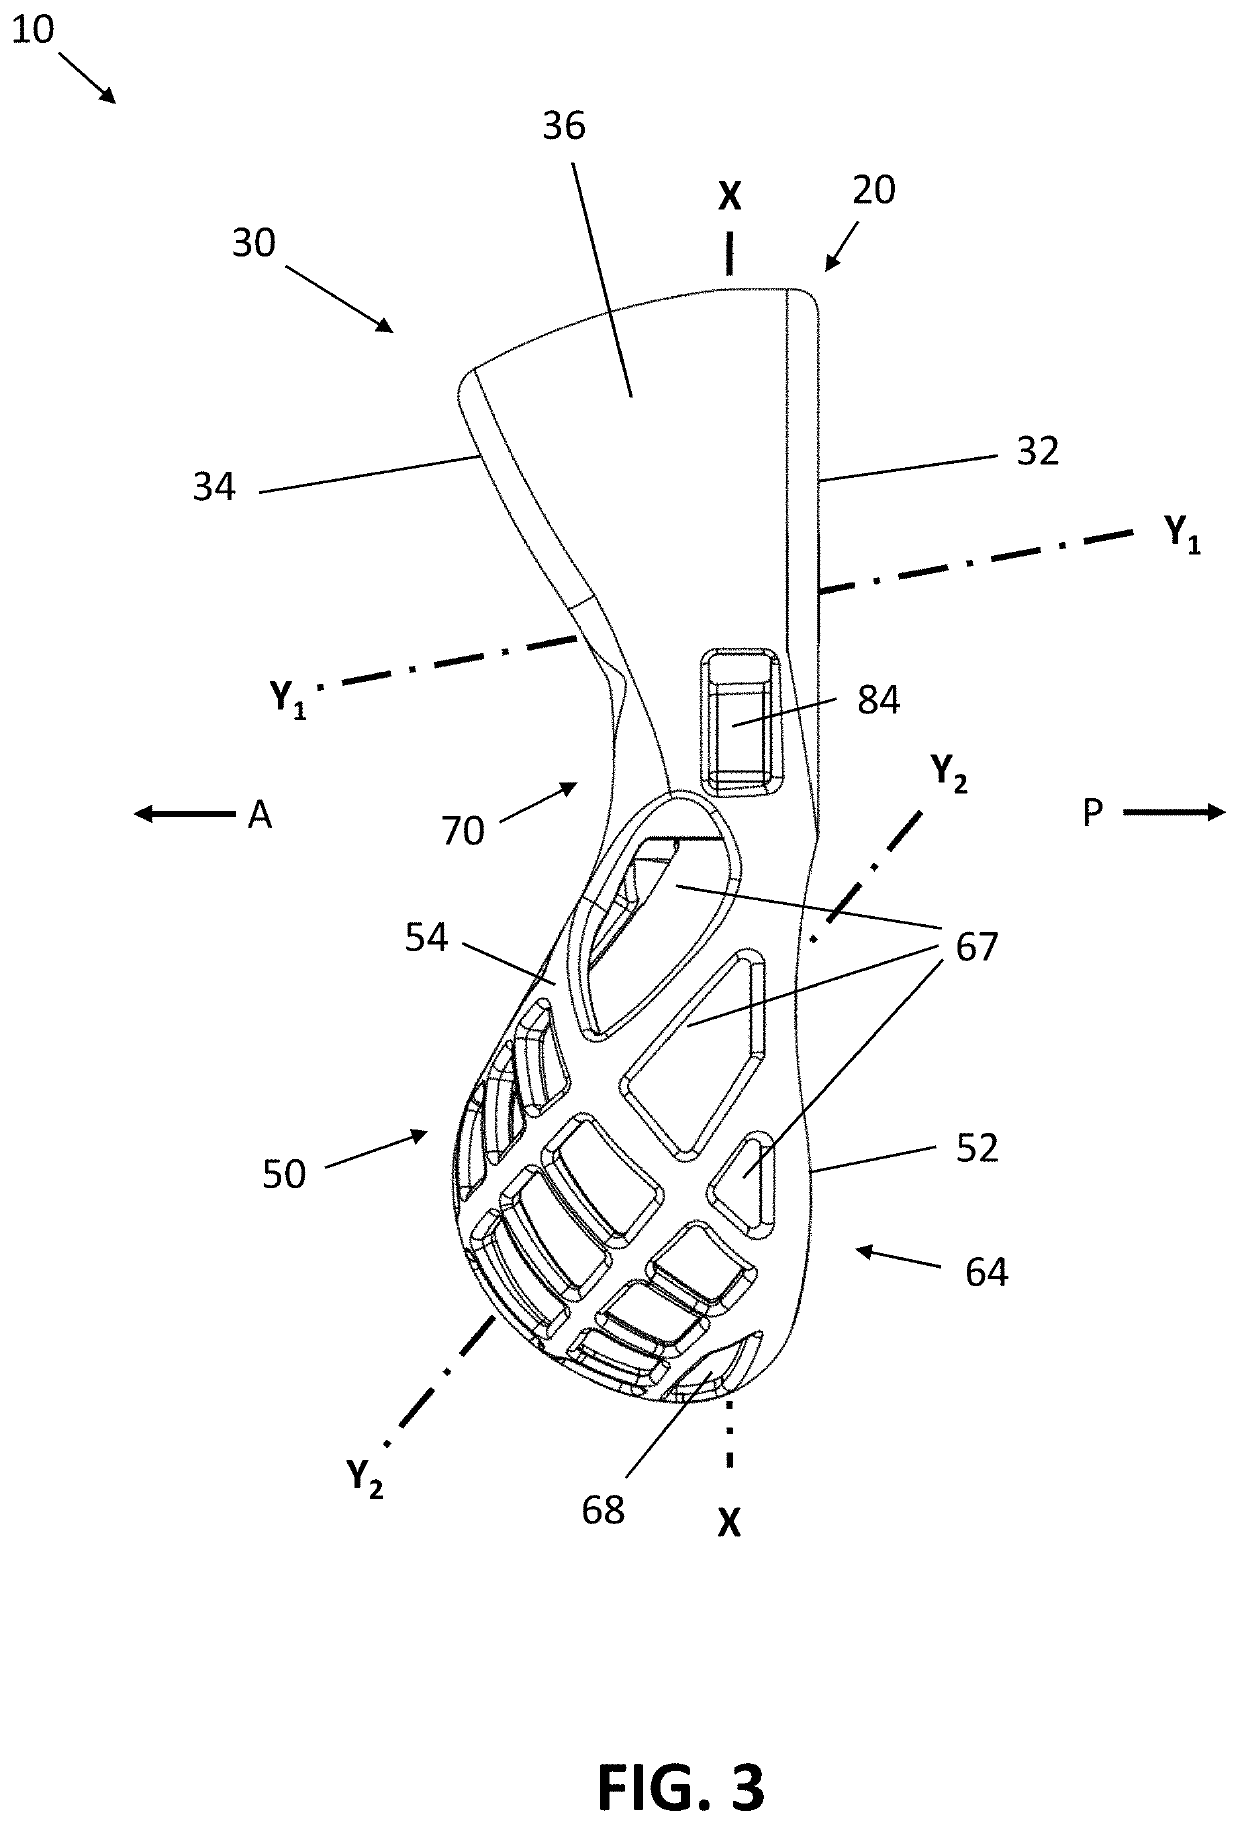 Undergarment support apparatus and systems